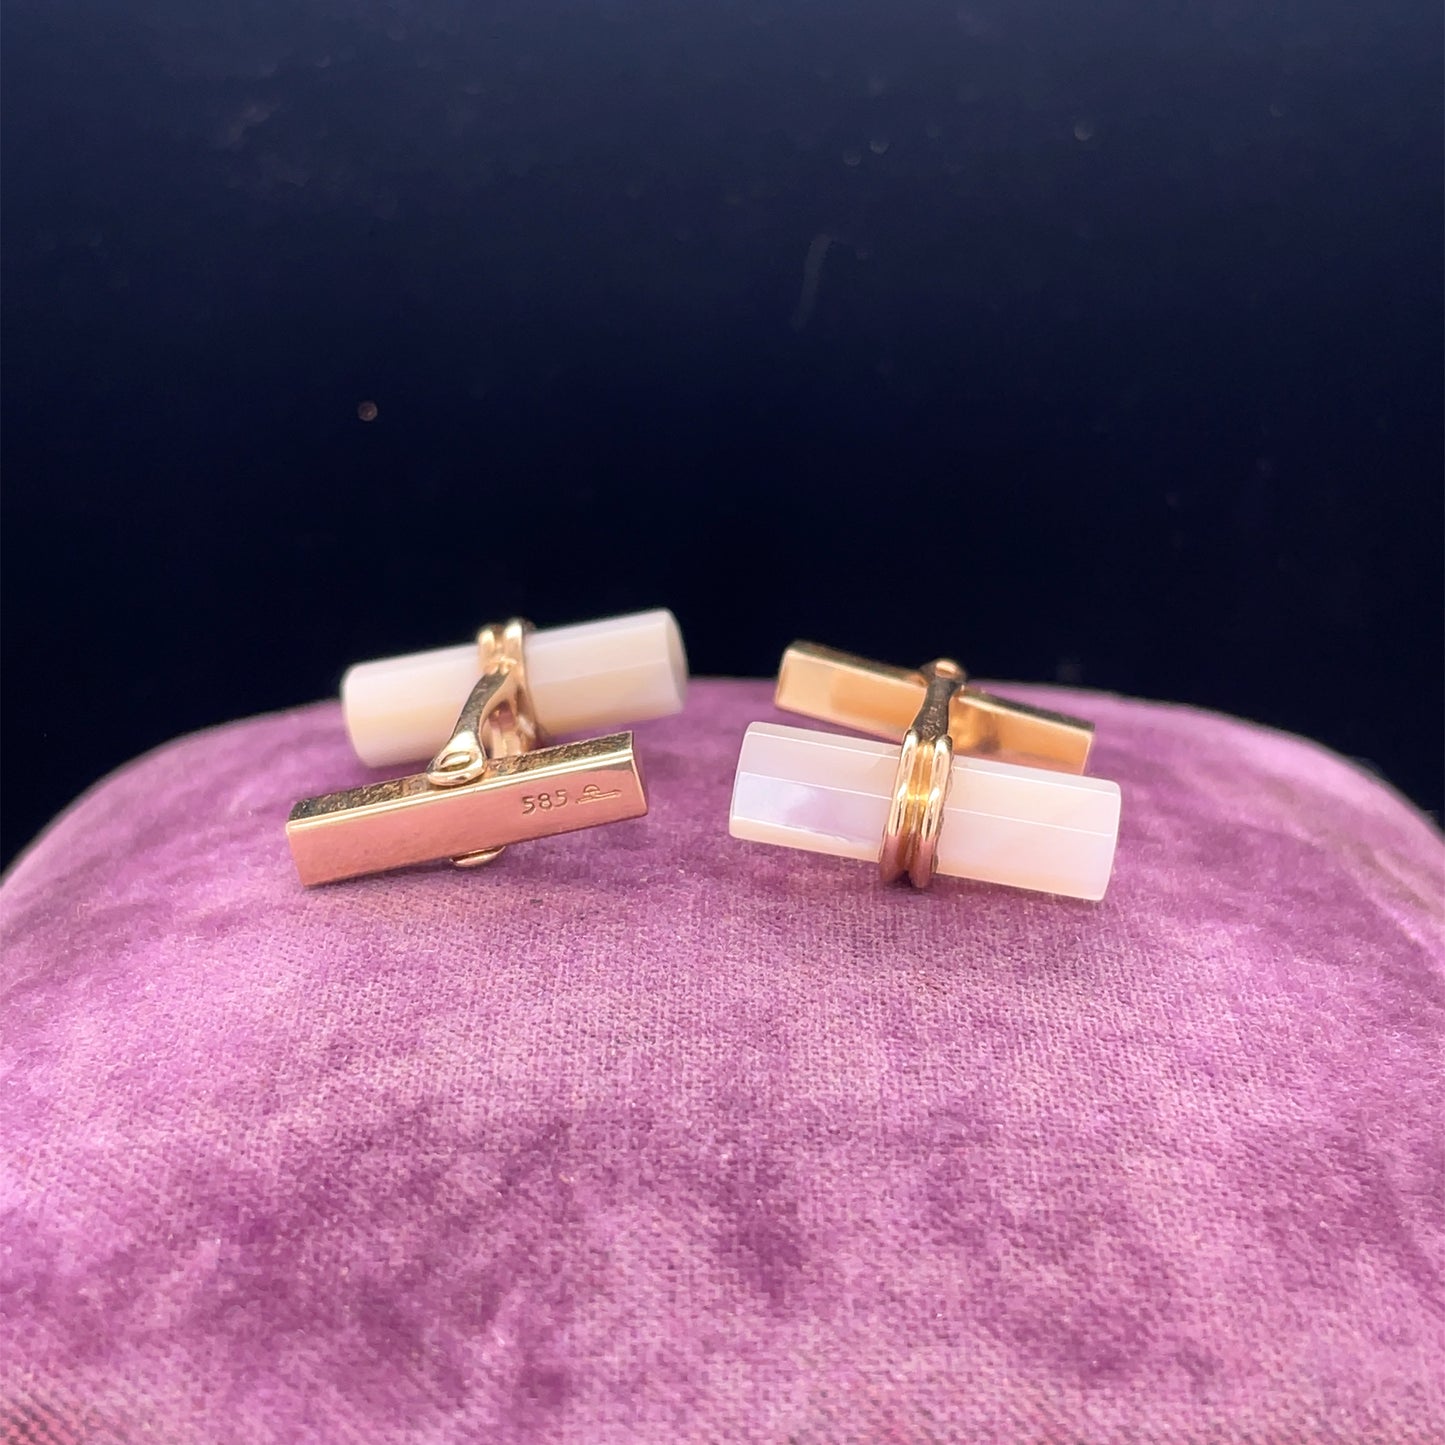 14K Yellow Gold Tiffany & Co Mother Of Pearl Cufflinks